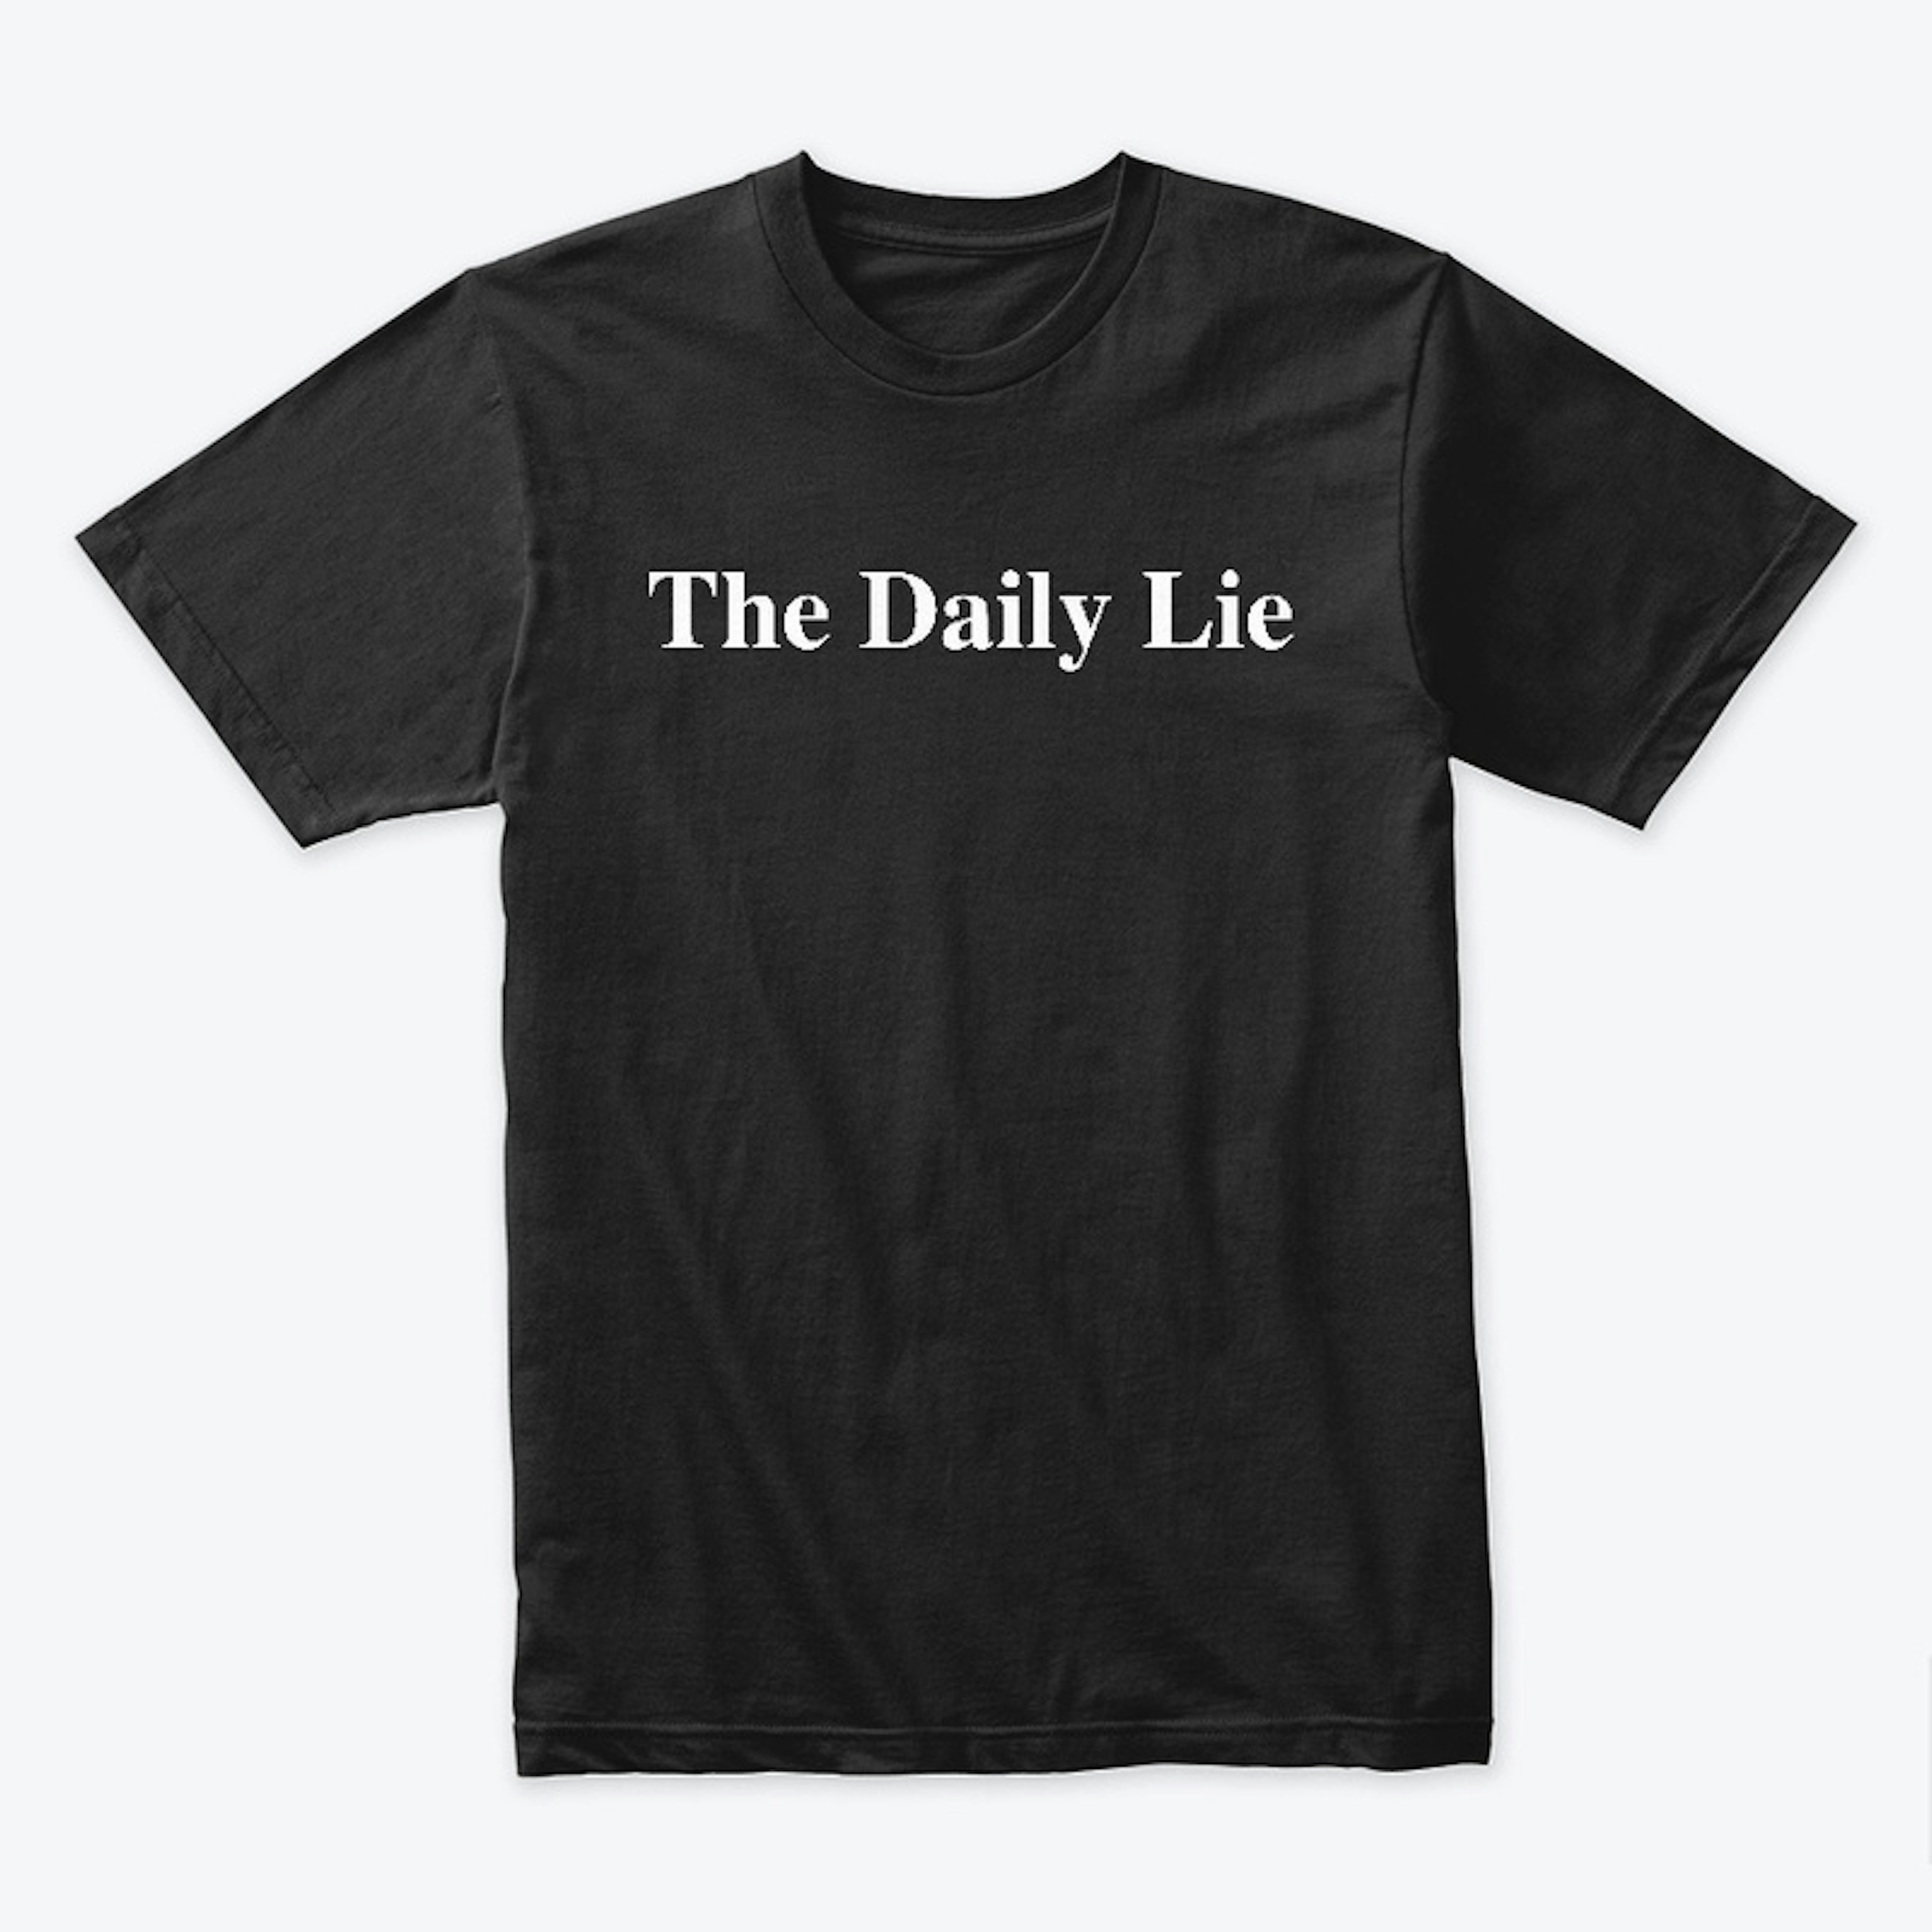 The Daily Lie